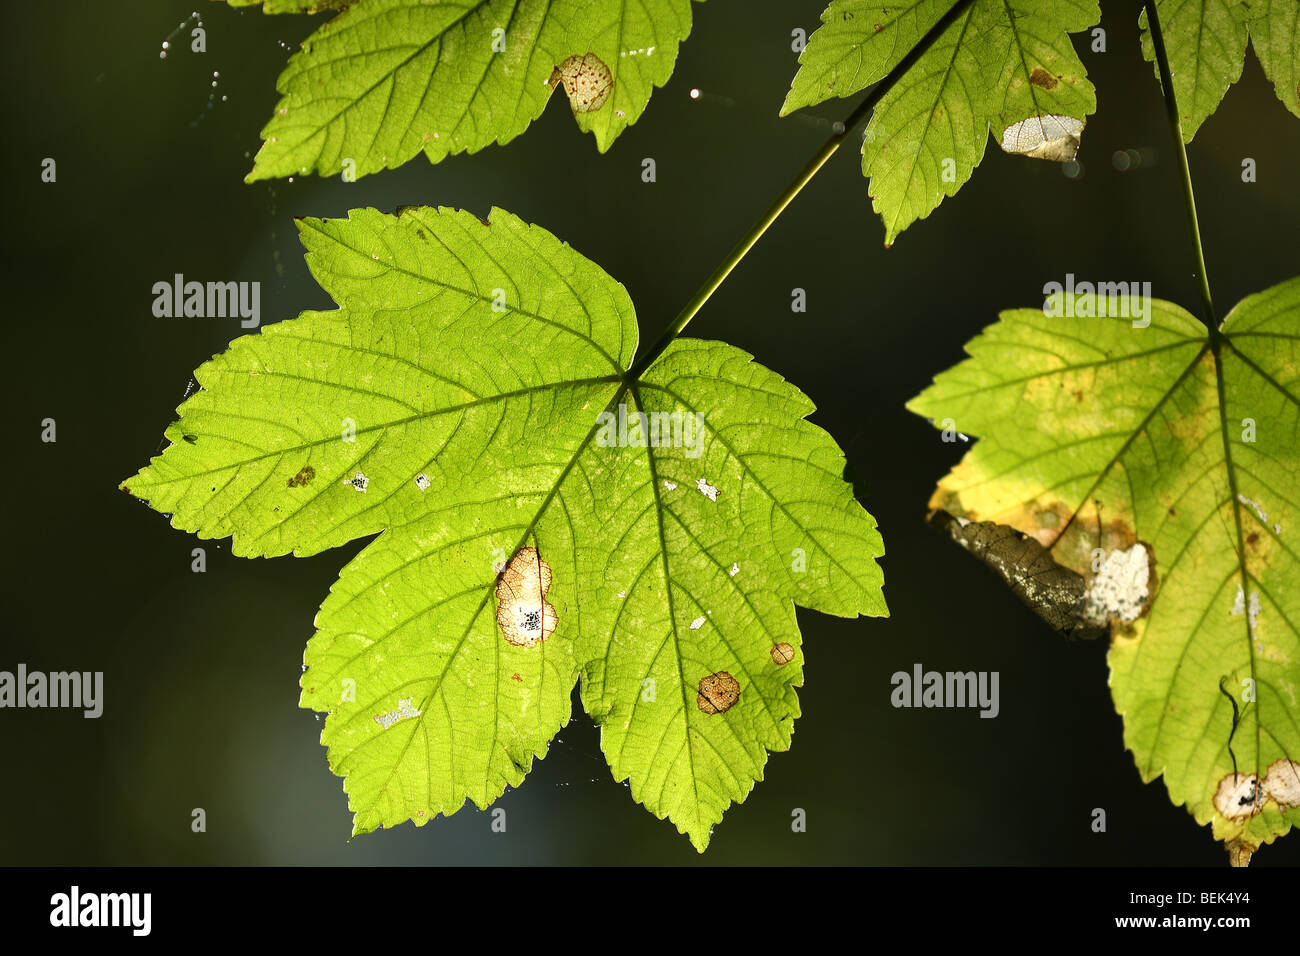 Leaves of Sycamore tree (Acer pseudoplatanus) in forest Stock Photo